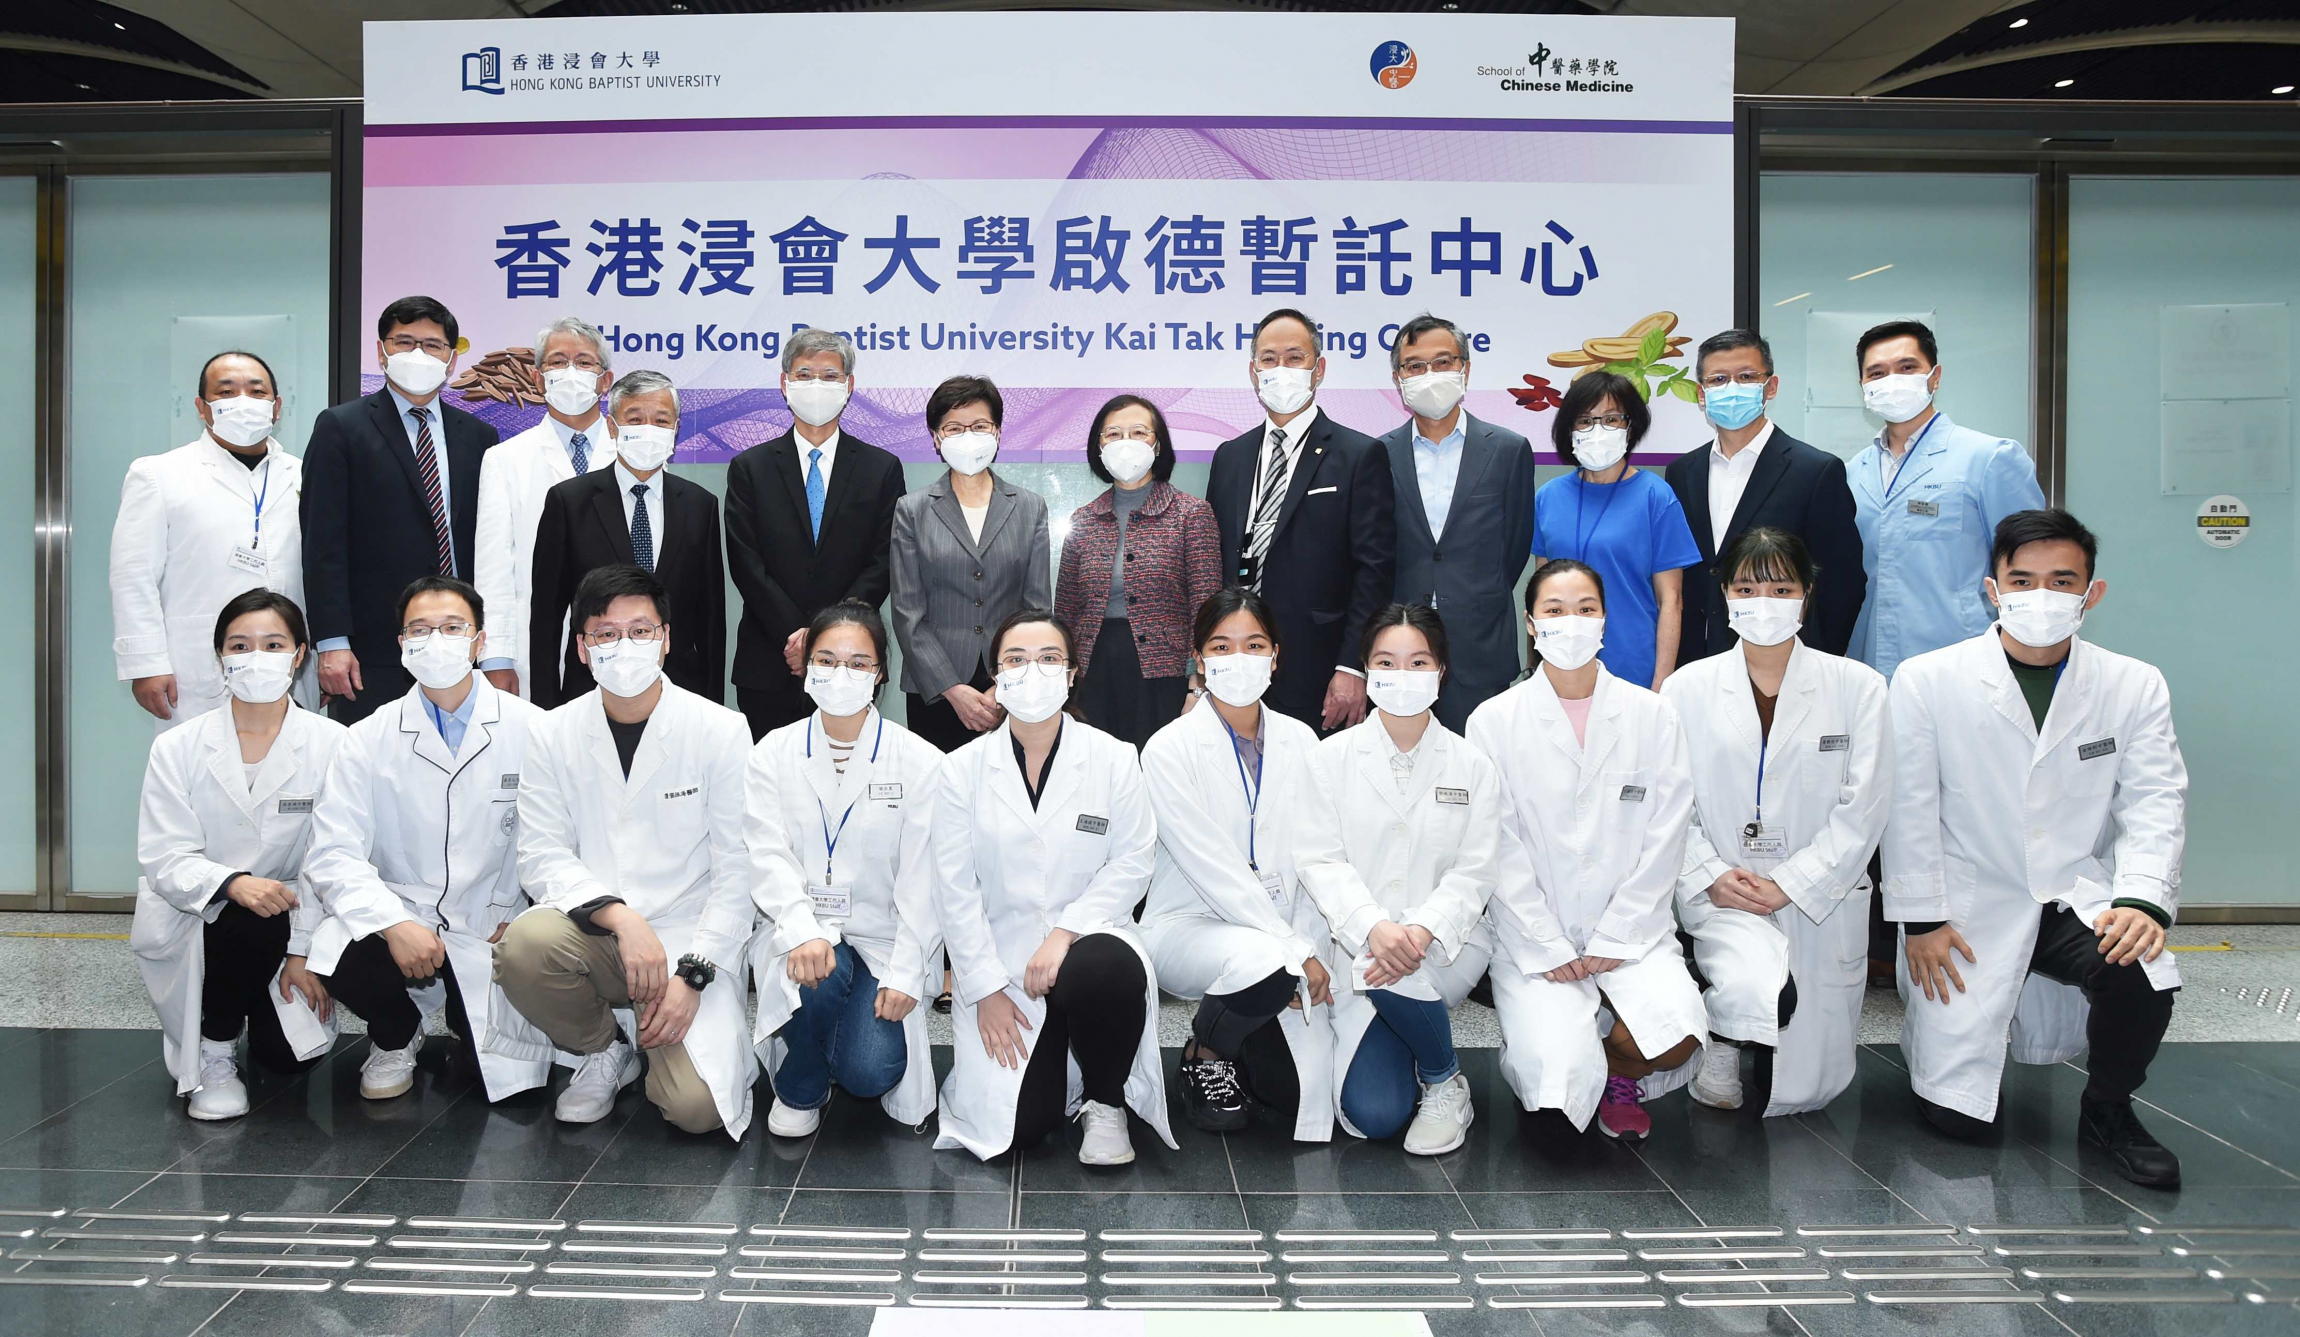 The government officials and organisation representatives visit the Kai Tak Holding Centre operated by HKBU and take photo with the Chinese medicine team of the School of Chinese Medicine at HKBU.